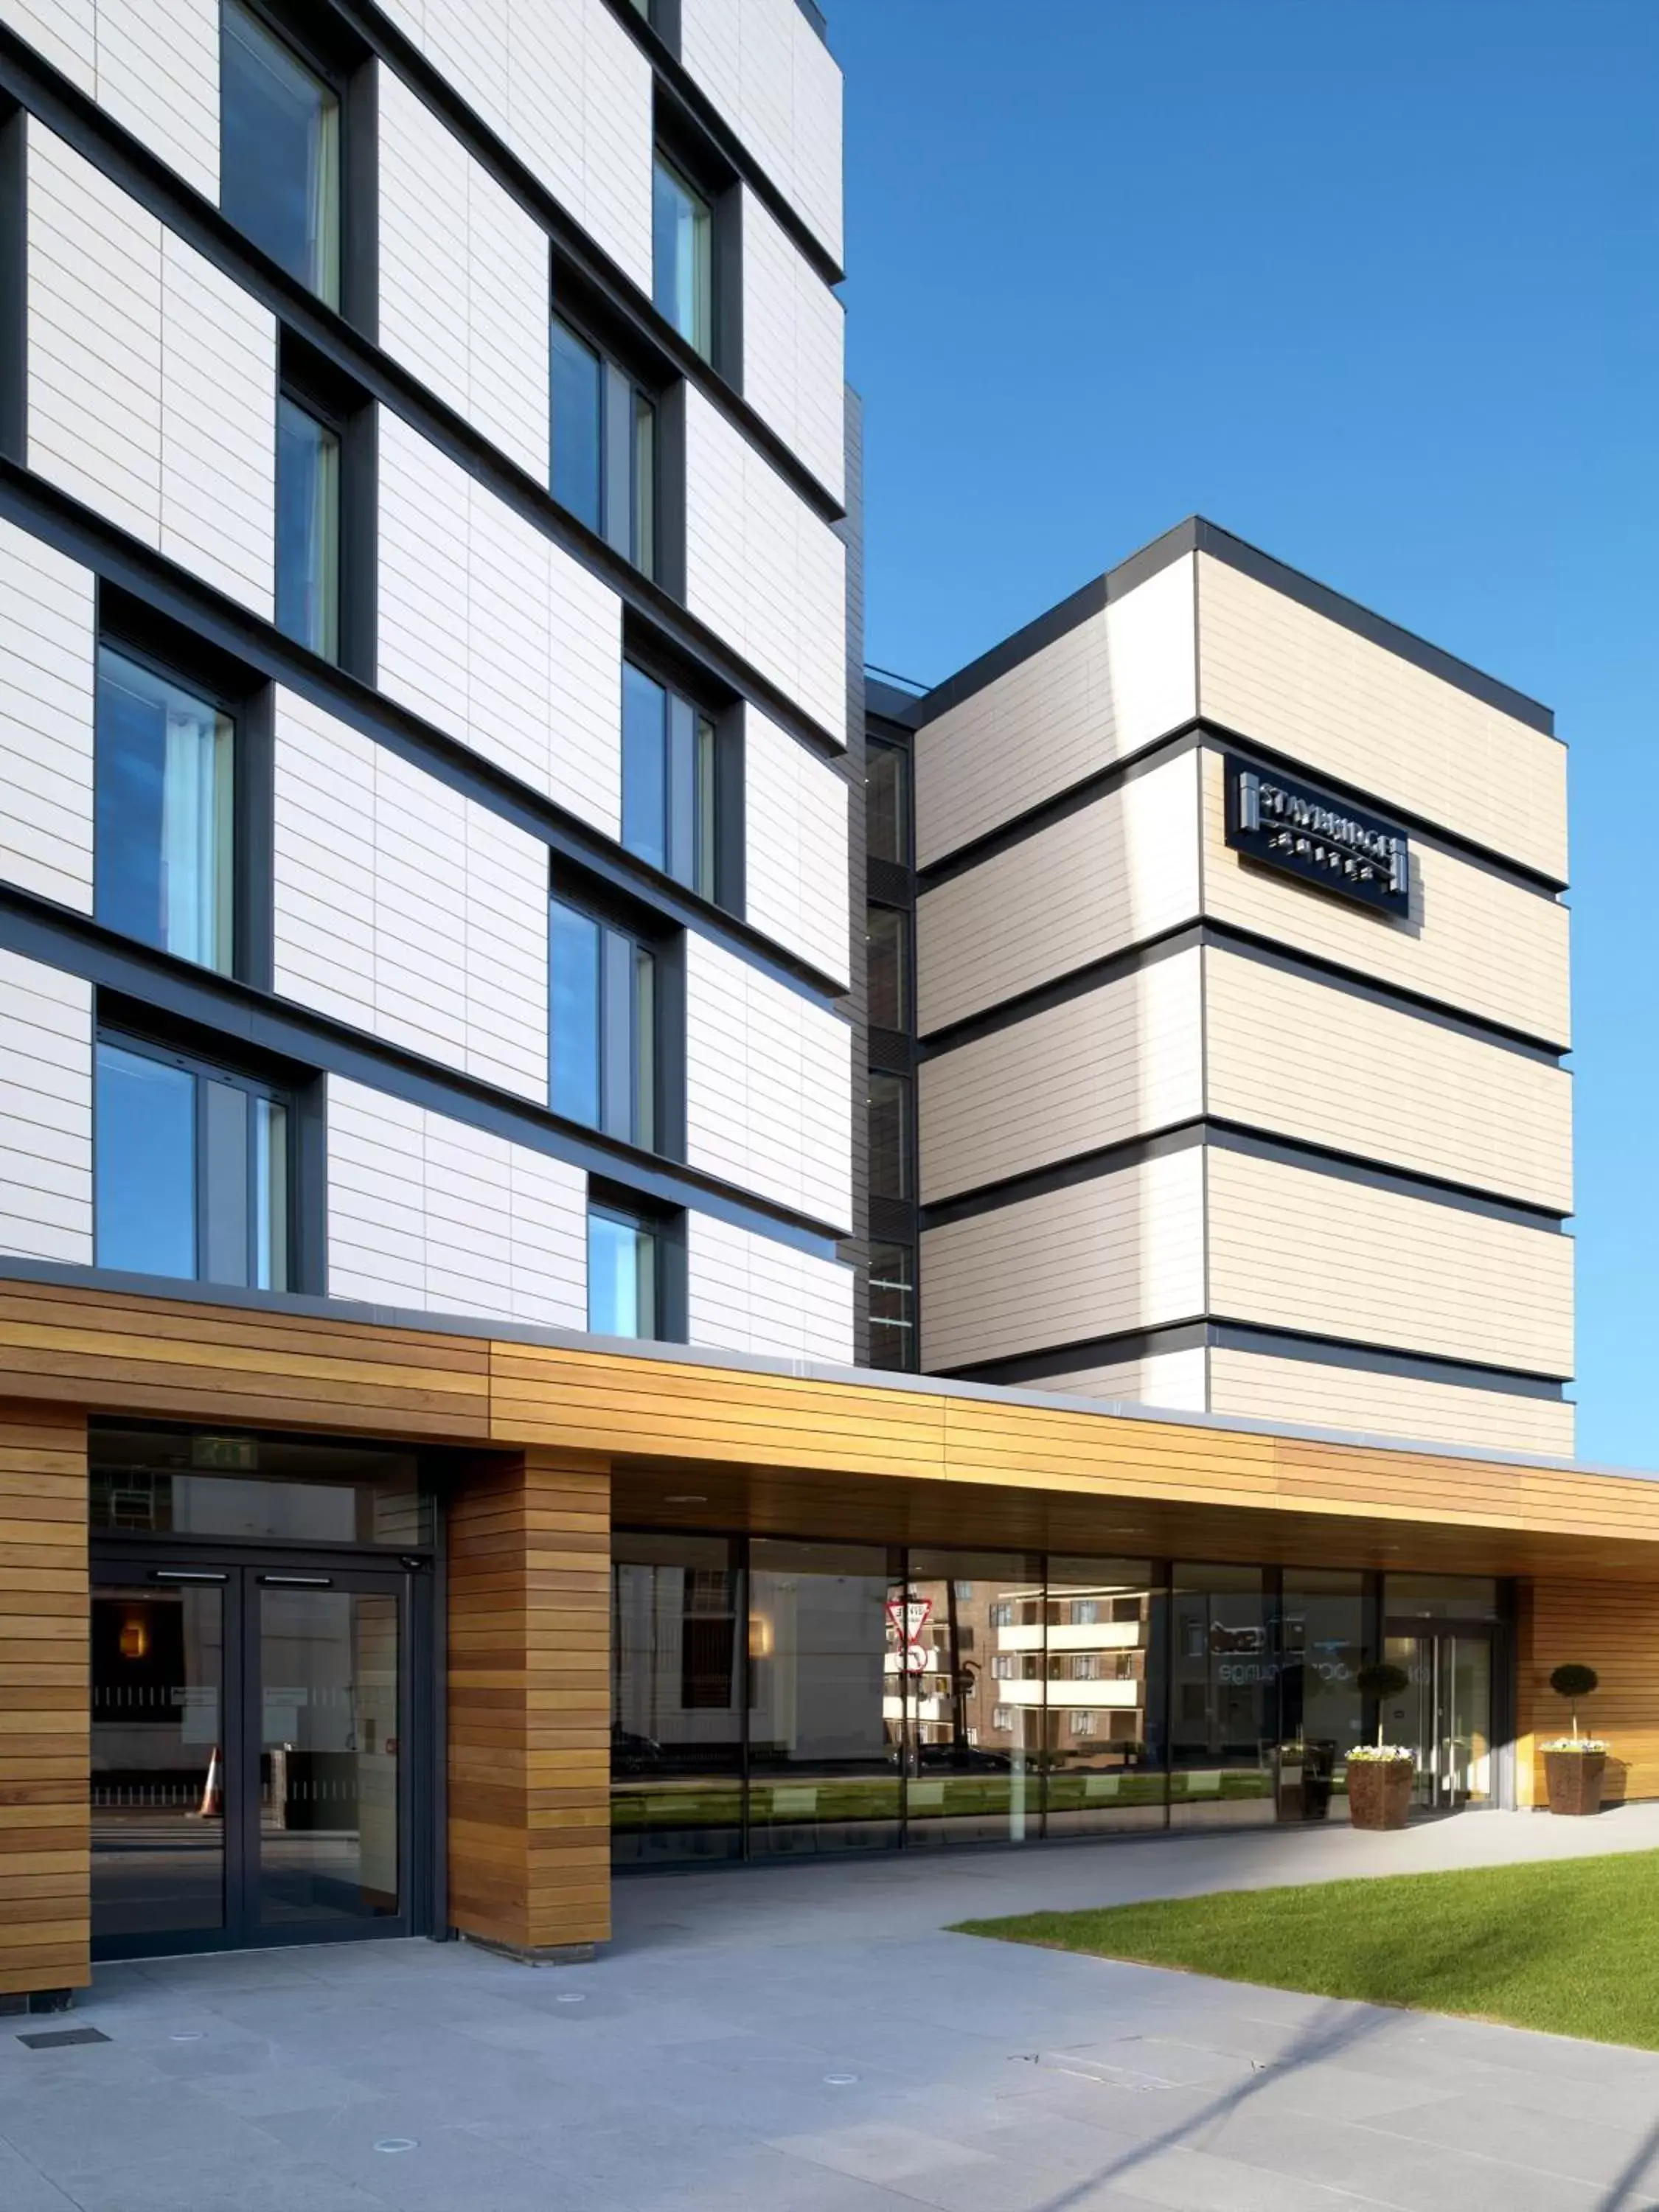 Property building, Facade/Entrance in Staybridge Suites Newcastle, an IHG Hotel